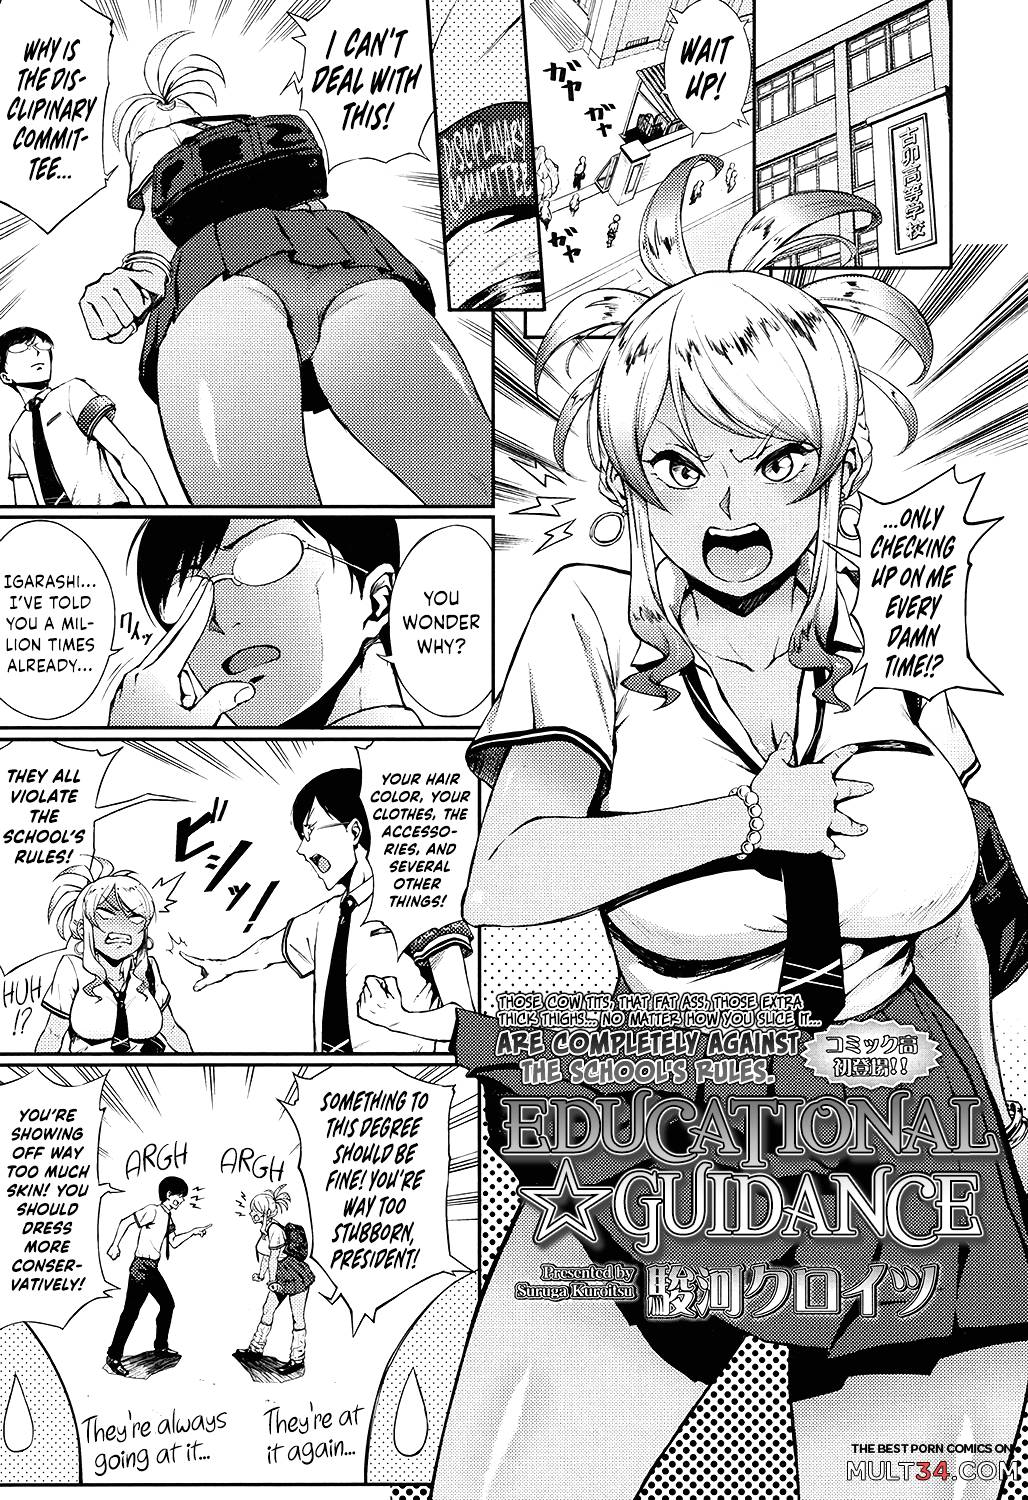 Educational ☆ Guidance page 1